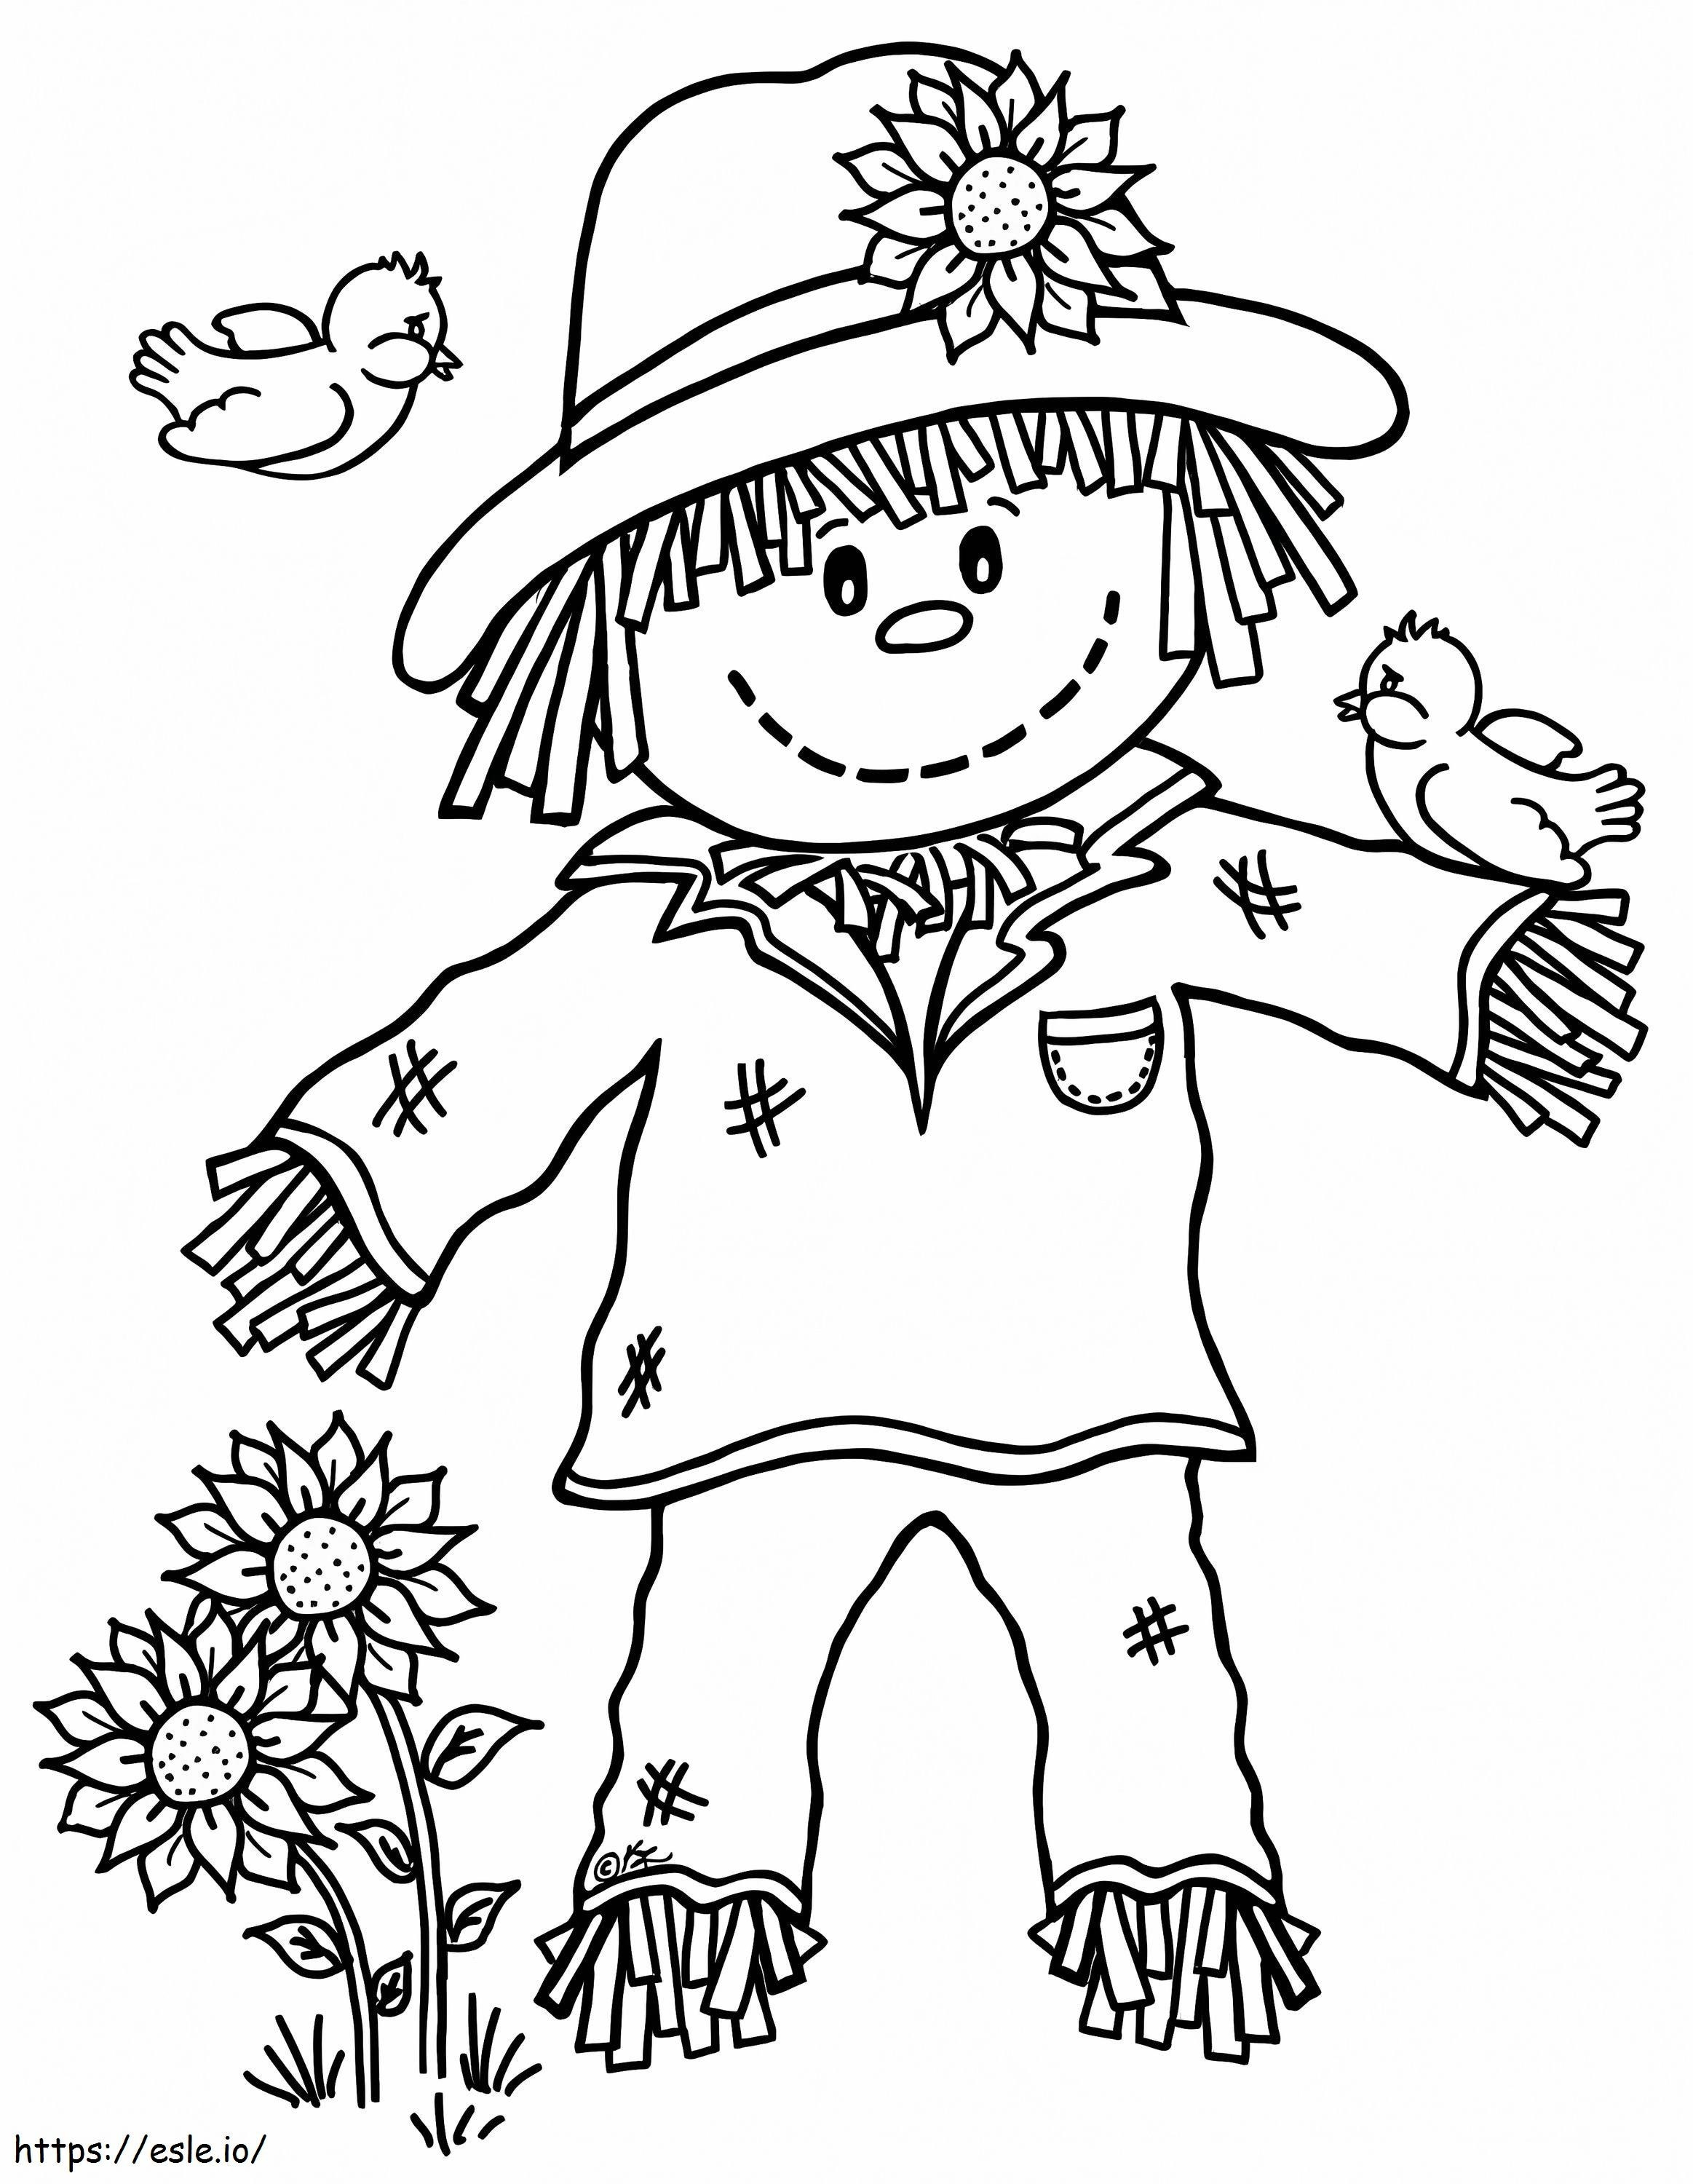 Smiling Scarecrow With Two Birds coloring page